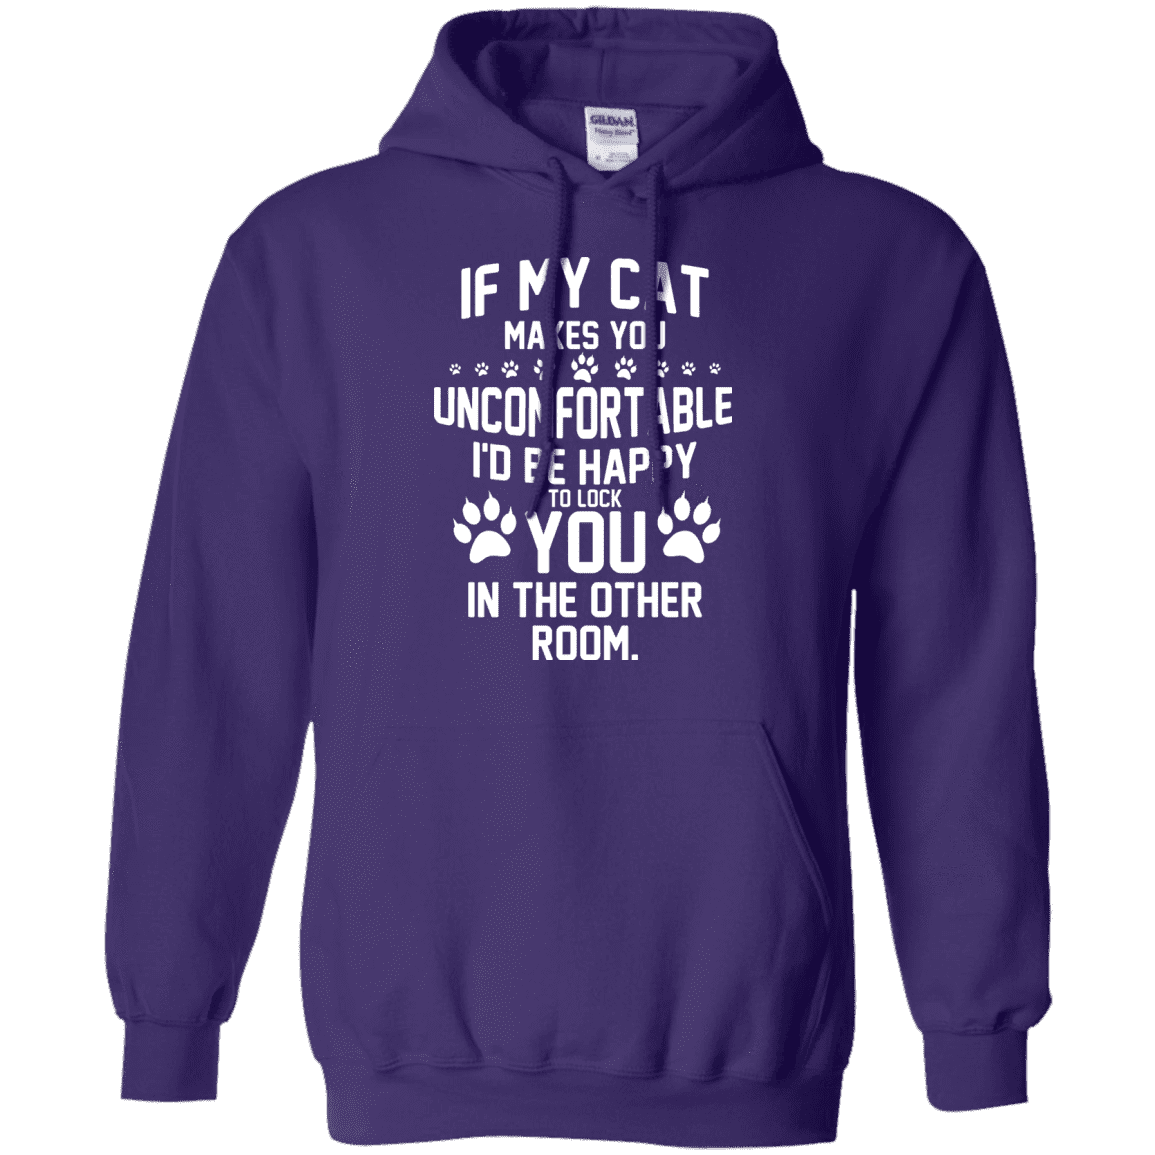 If My Cat Makes You Uncomfortable - Hoodie – Rescuers Club